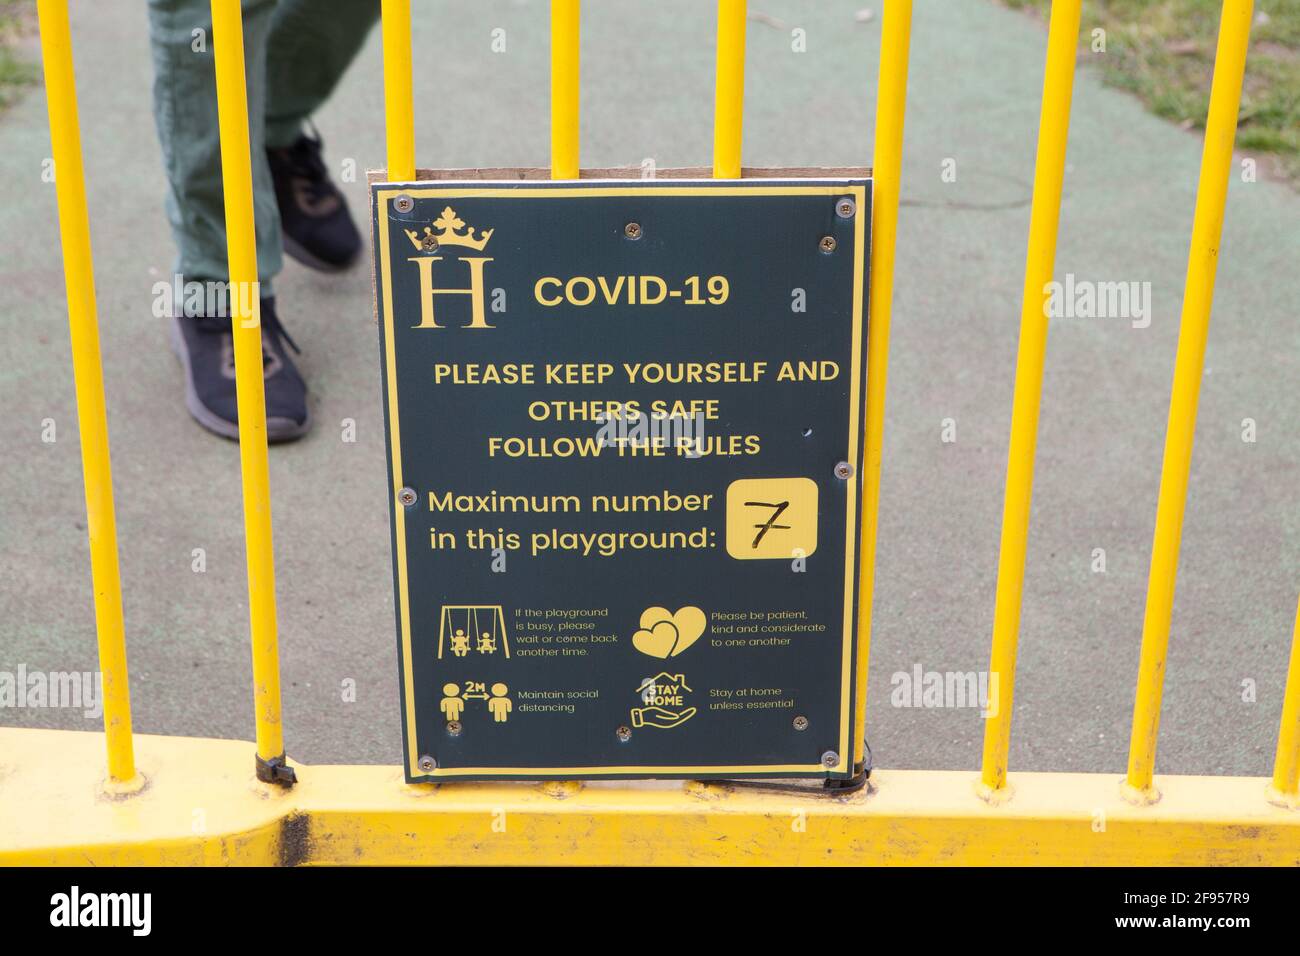 A sign at the entrance to a playground in Henley-on-Thames warns that only 7 children can use it at once and must obey social distancing and hygiene rules. Anna Watson/Alamy Stock Photo